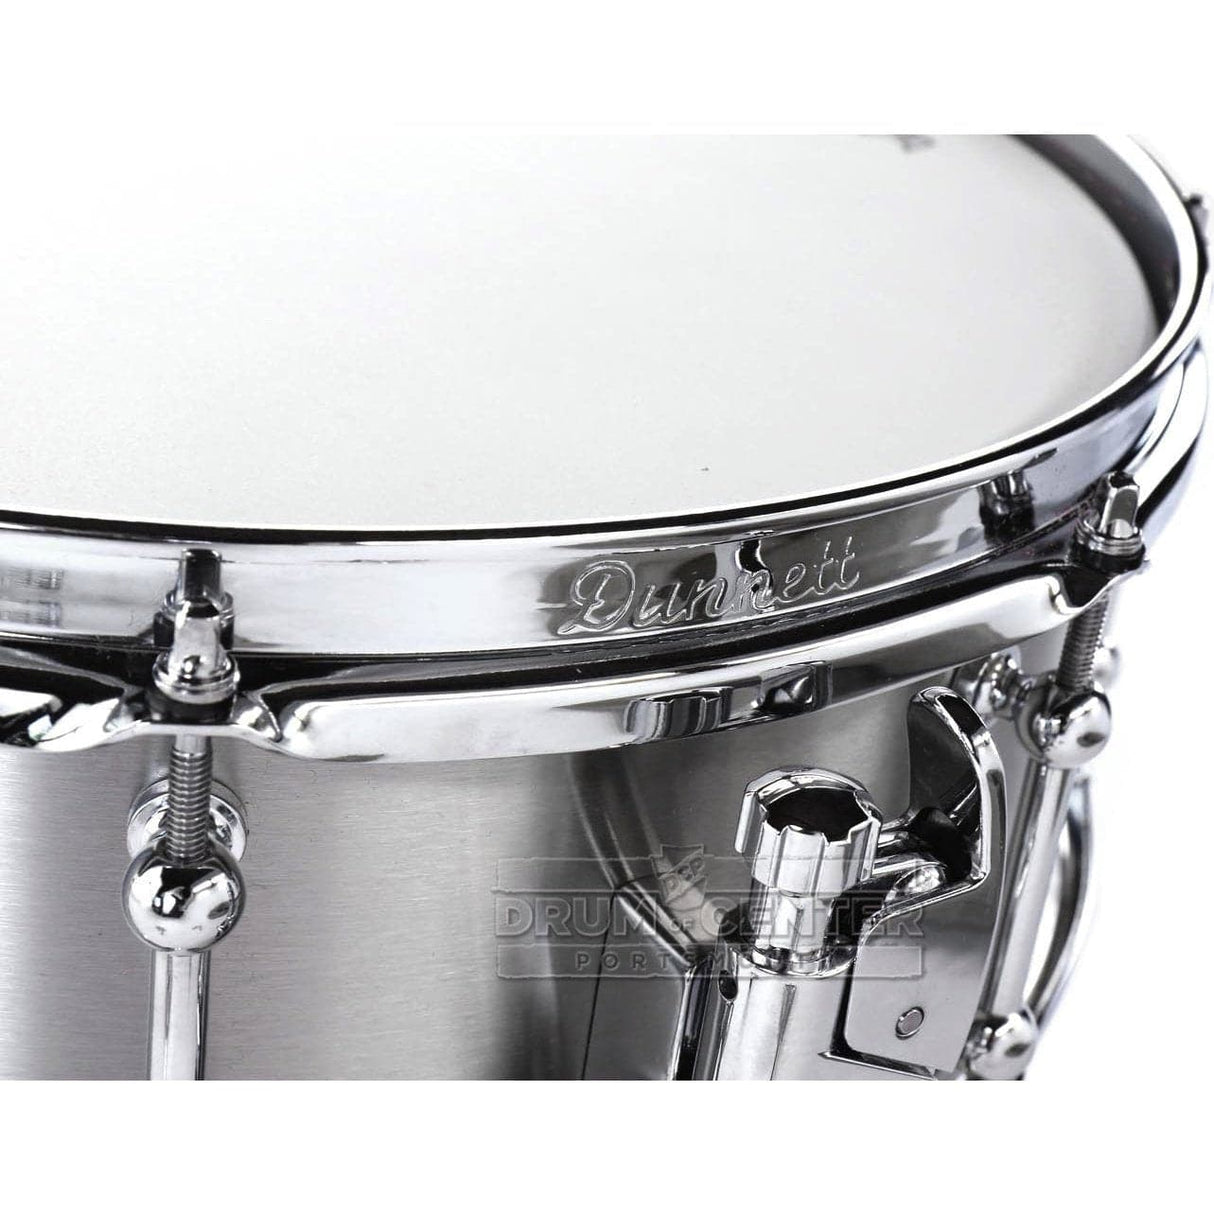 Dunnett Classic Stainless Steel Snare Drum 14x5.5 Brushed